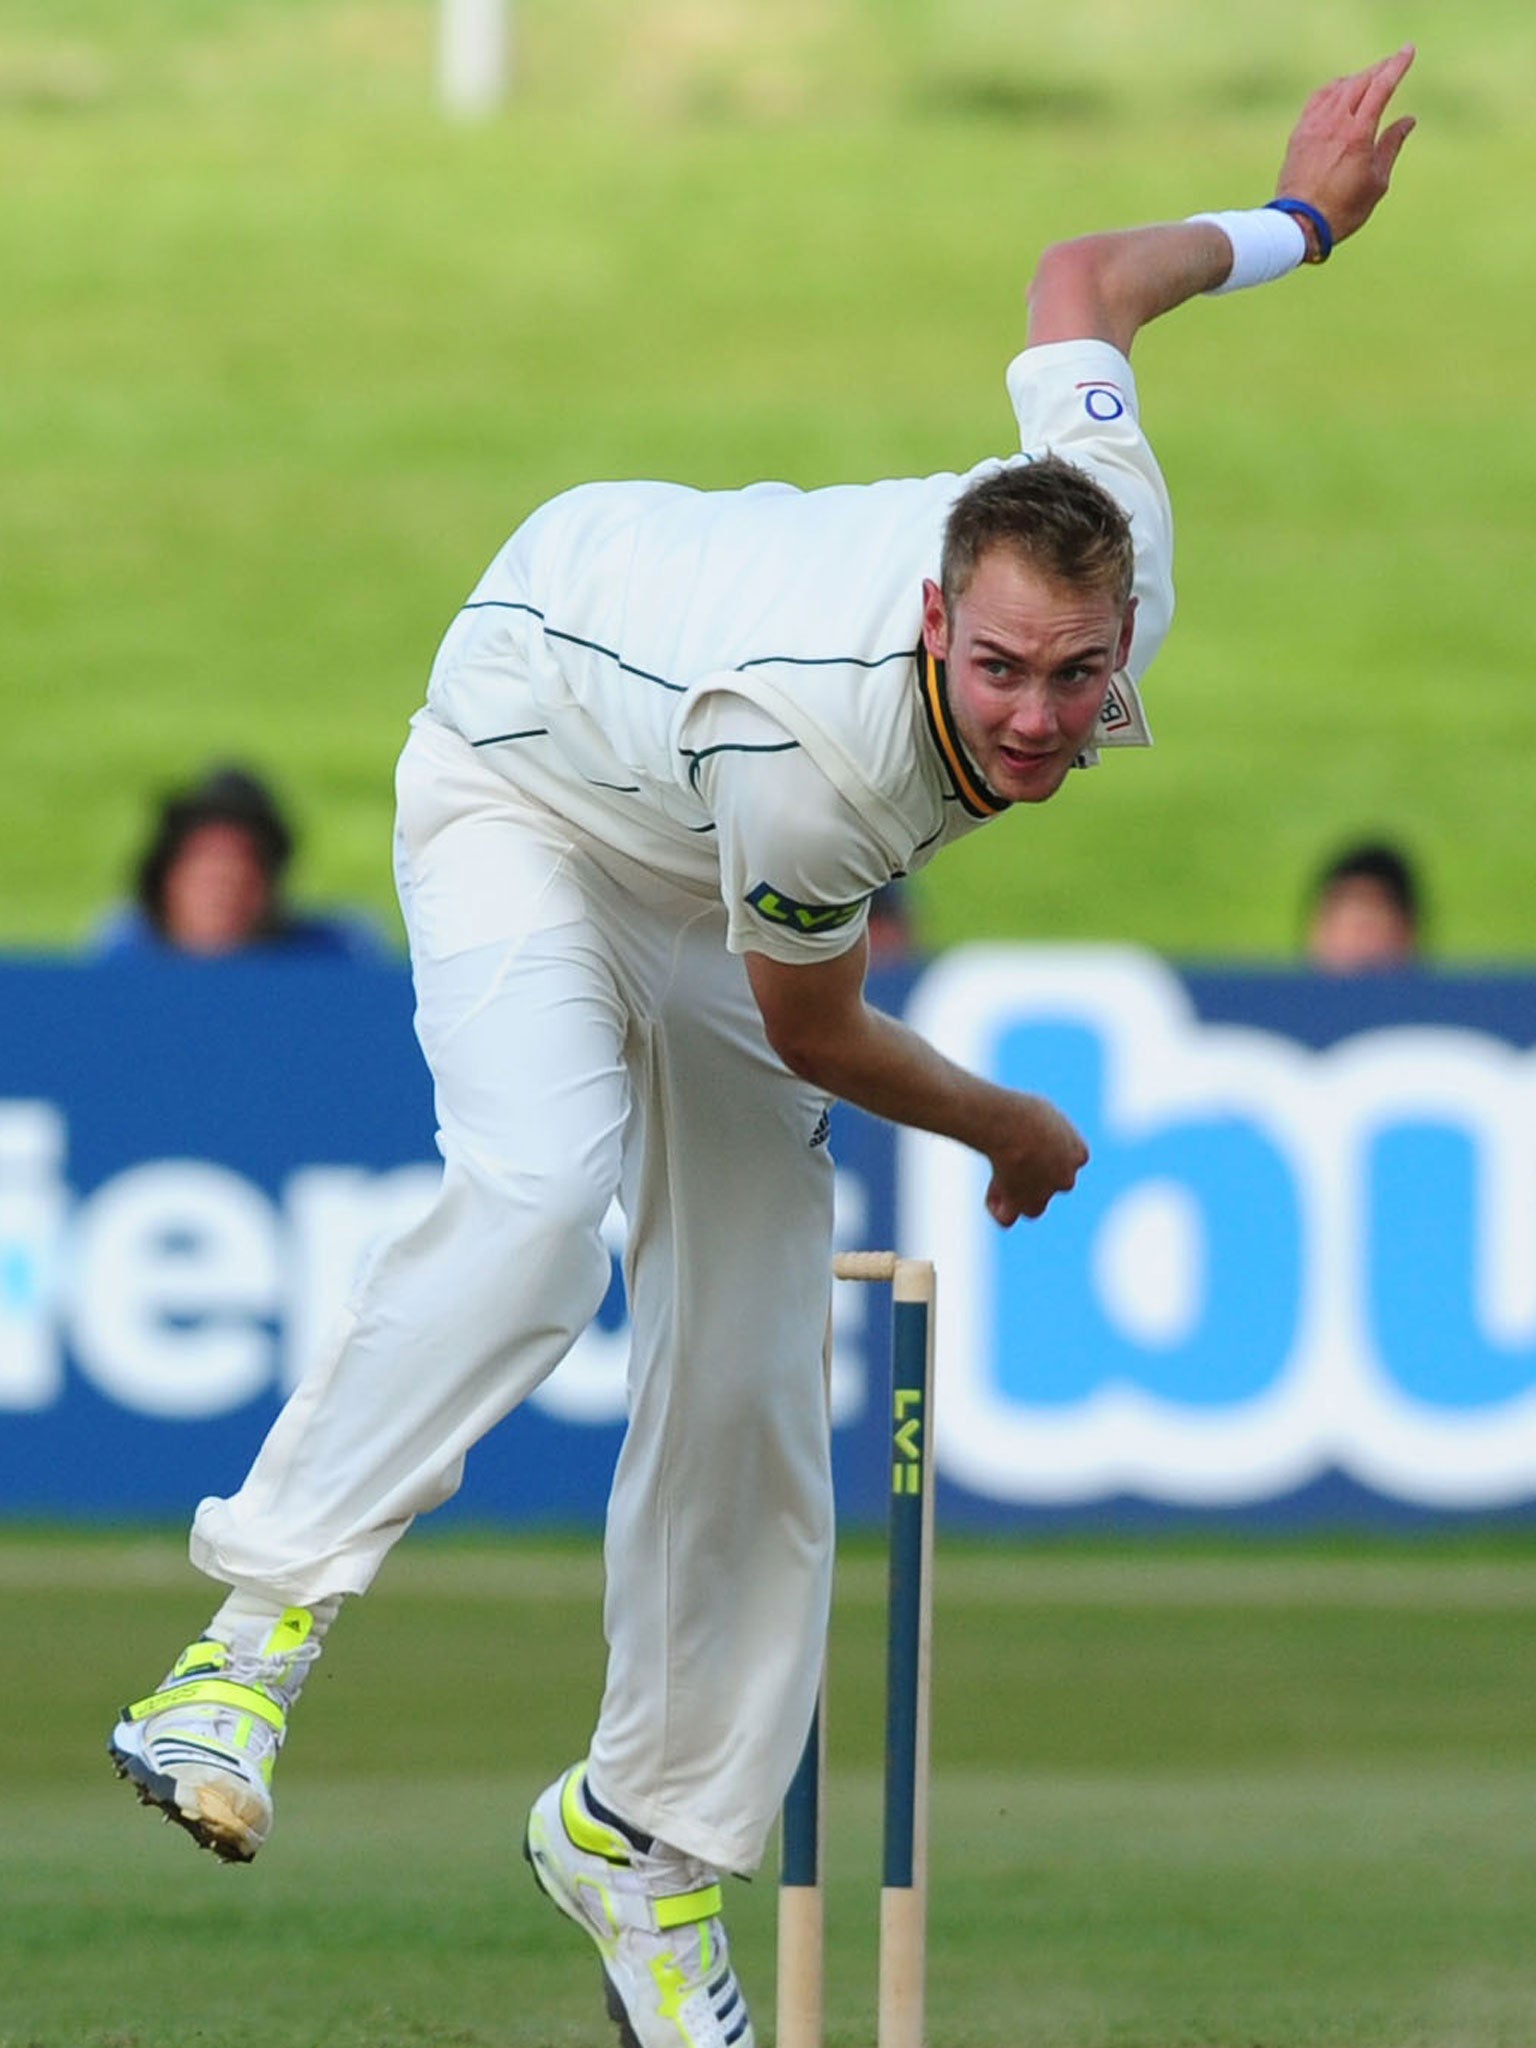 Broad smiles: Stuart Broad has taken no time to get going after the last Test